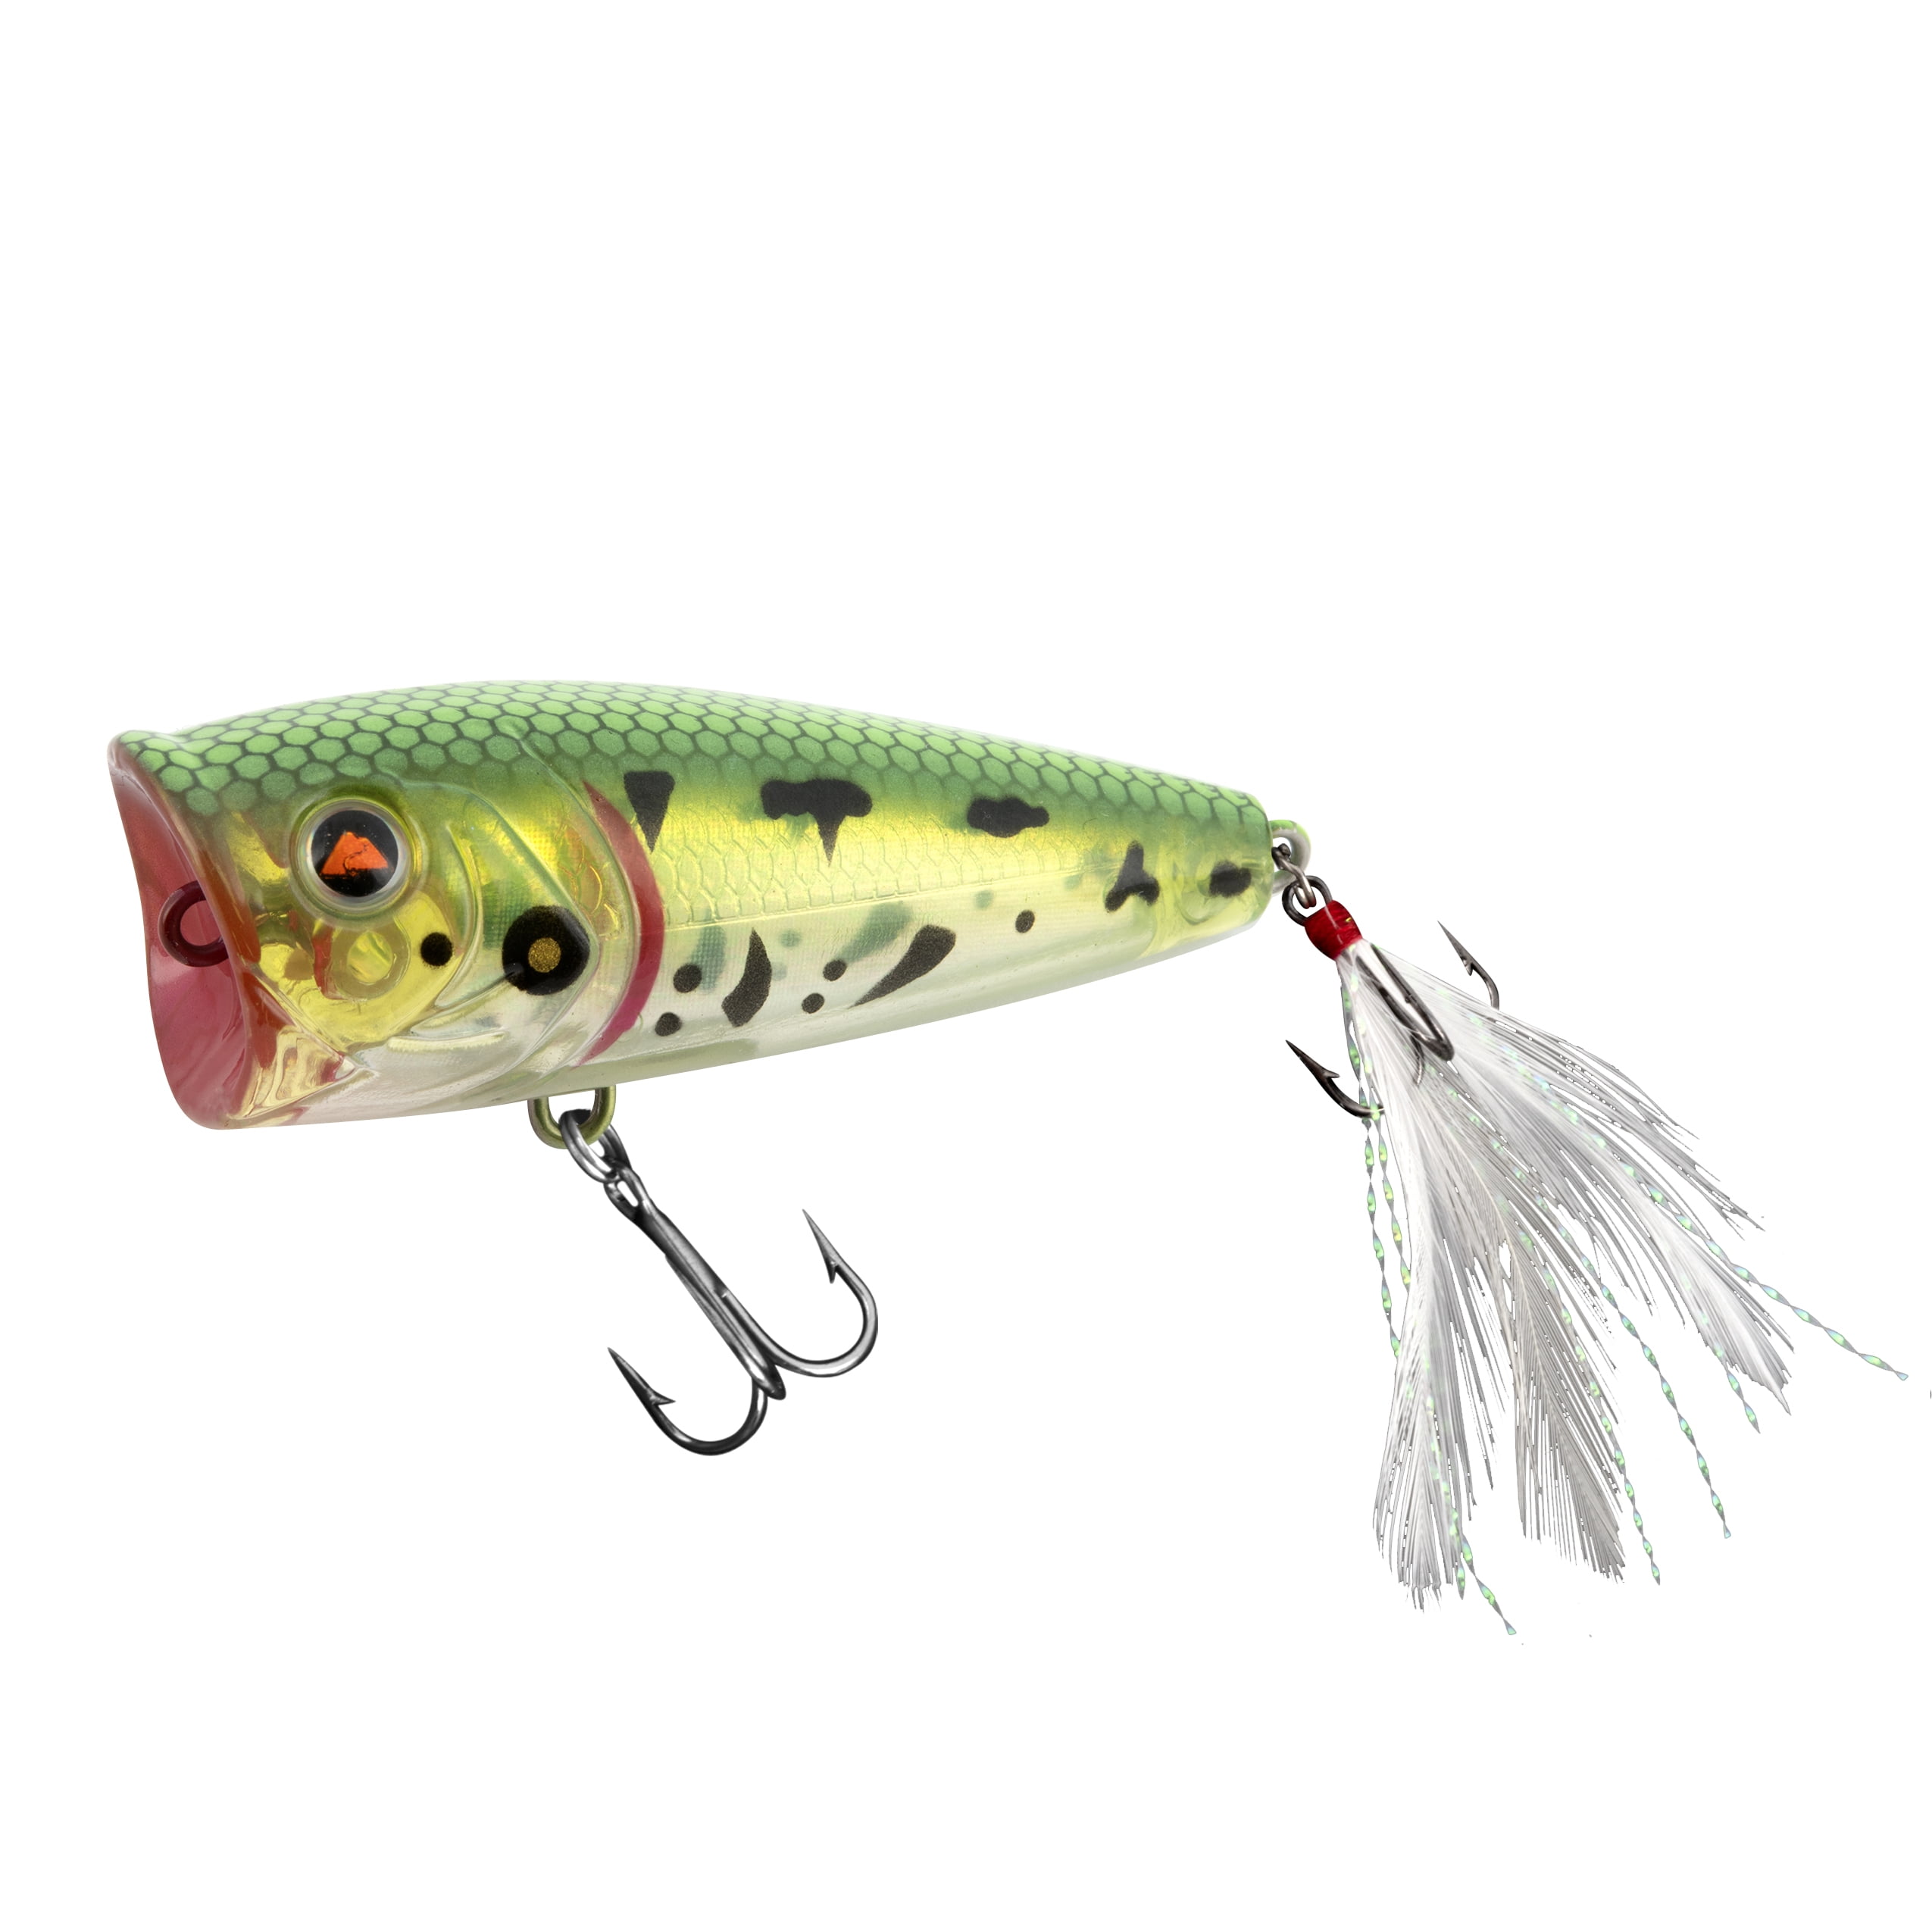 Best Popper Lures For Bass 